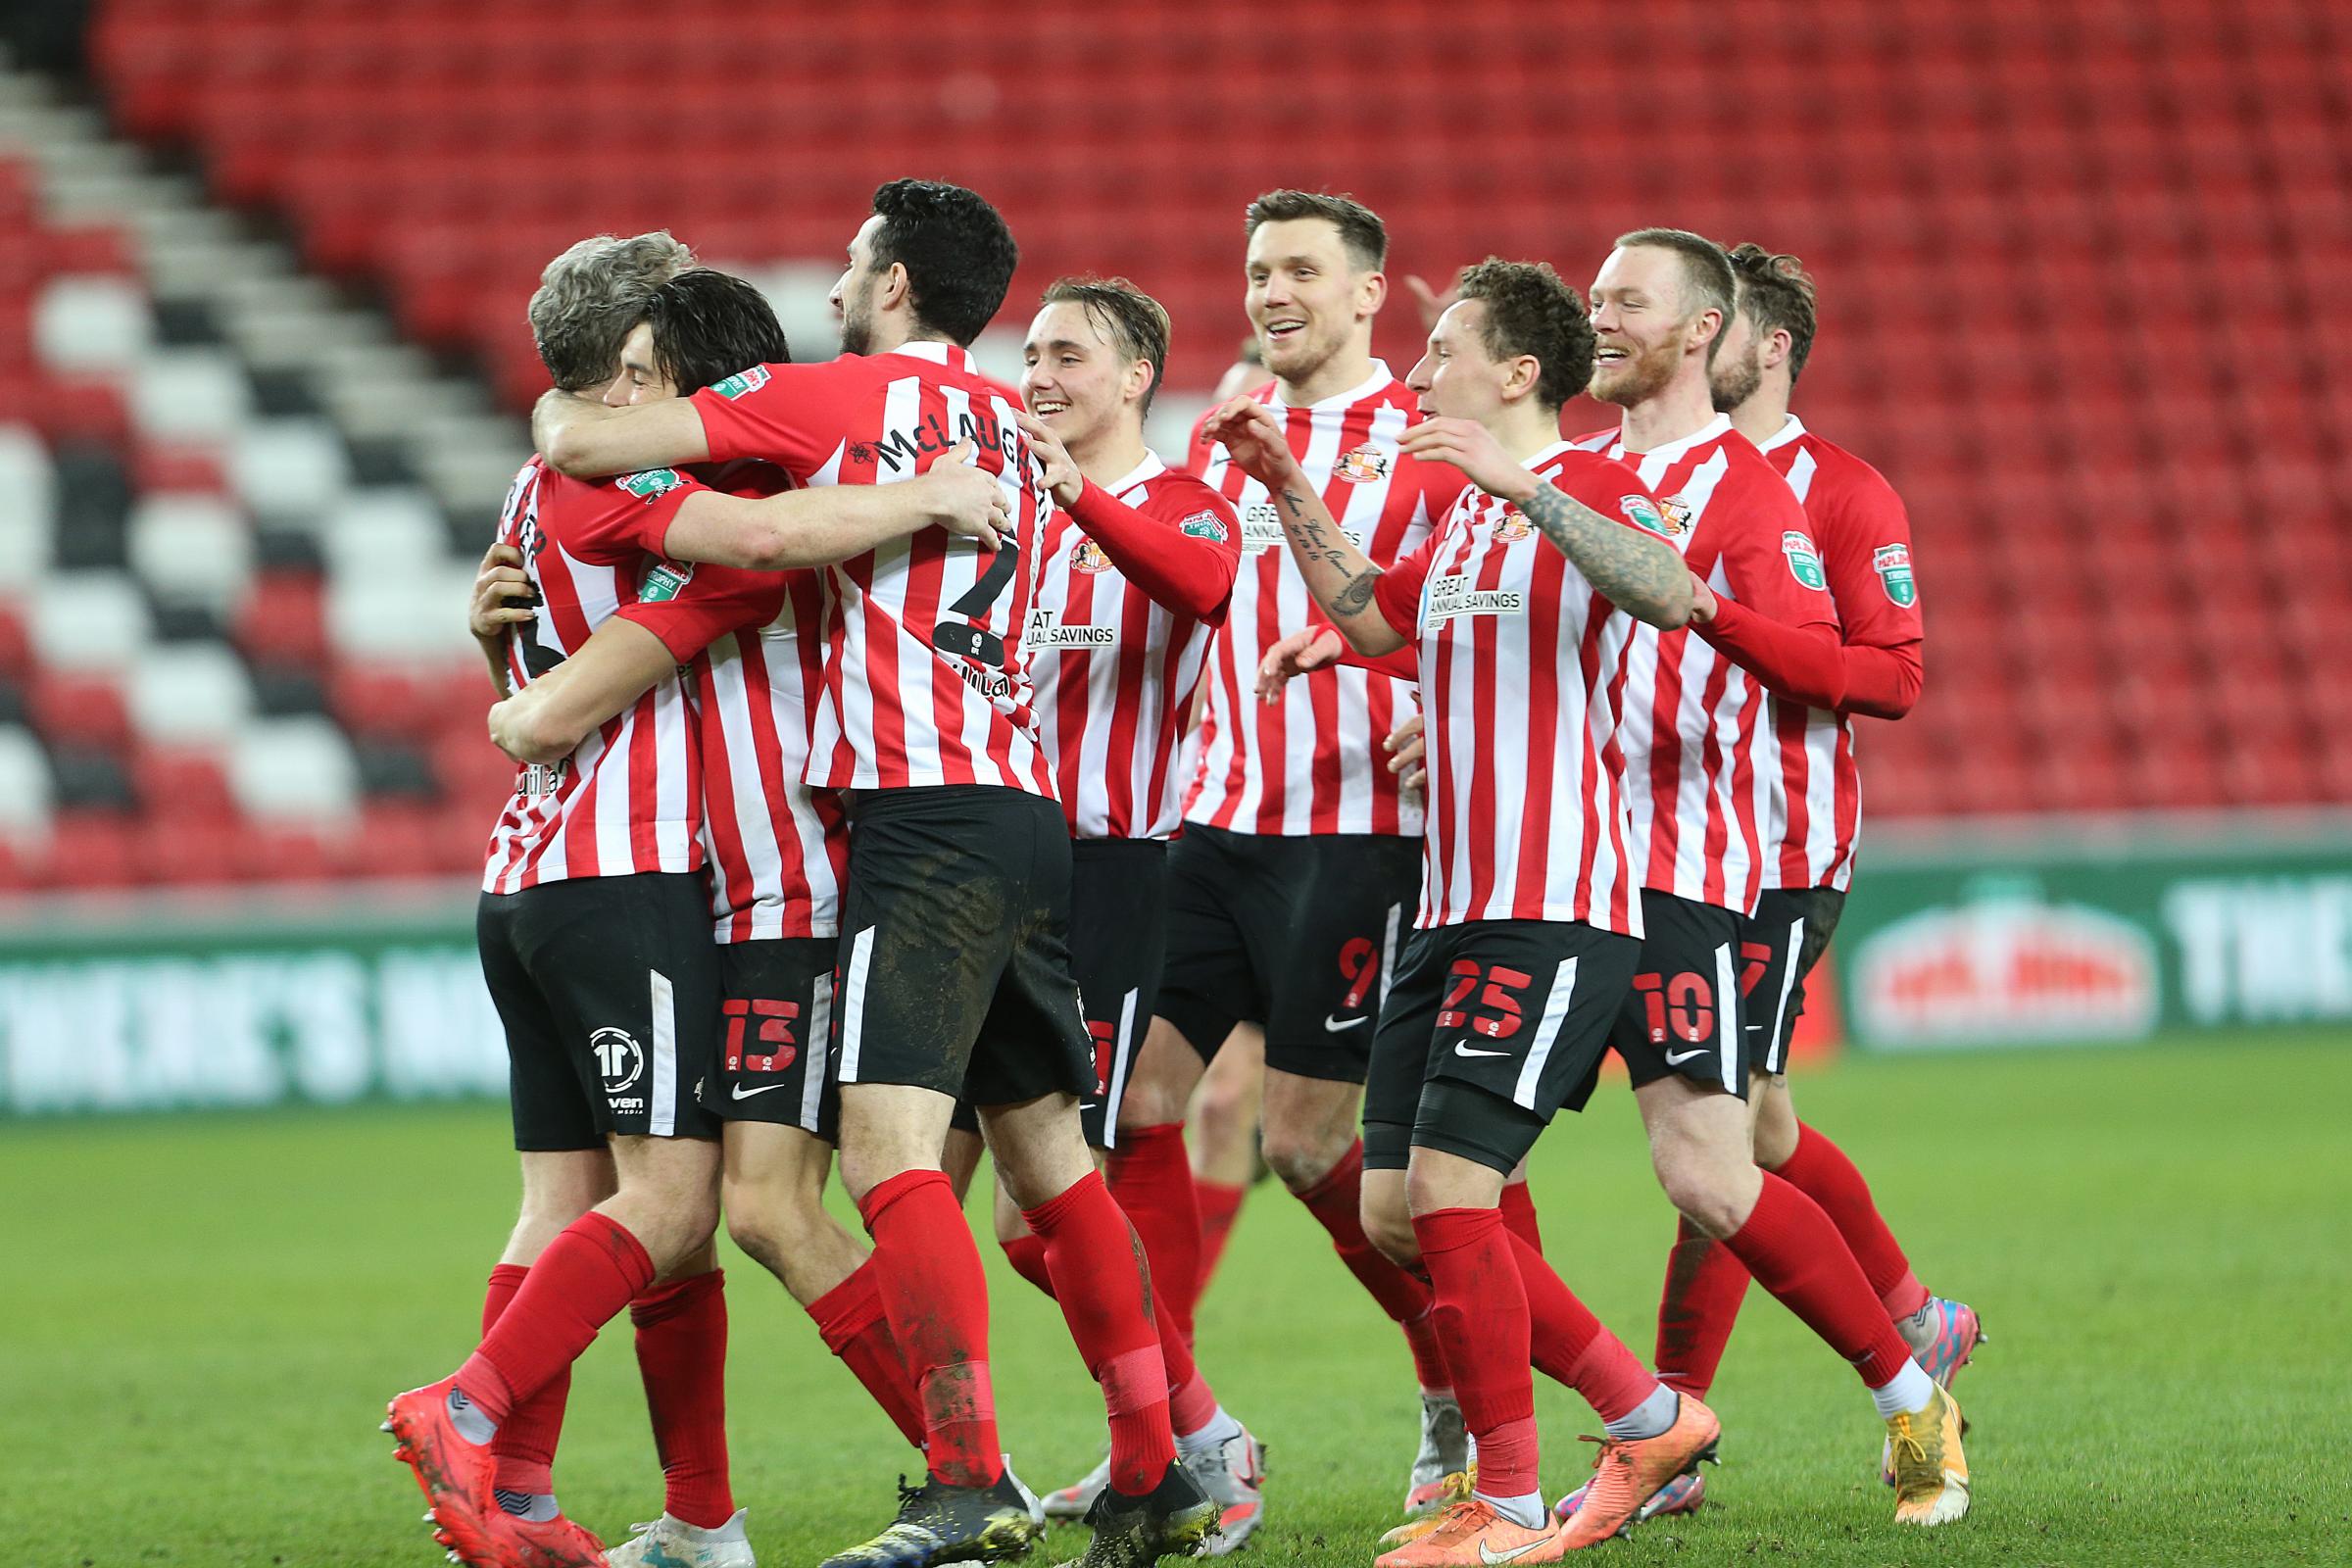 Sunderland's recent meetings with play-off opponents Lincoln